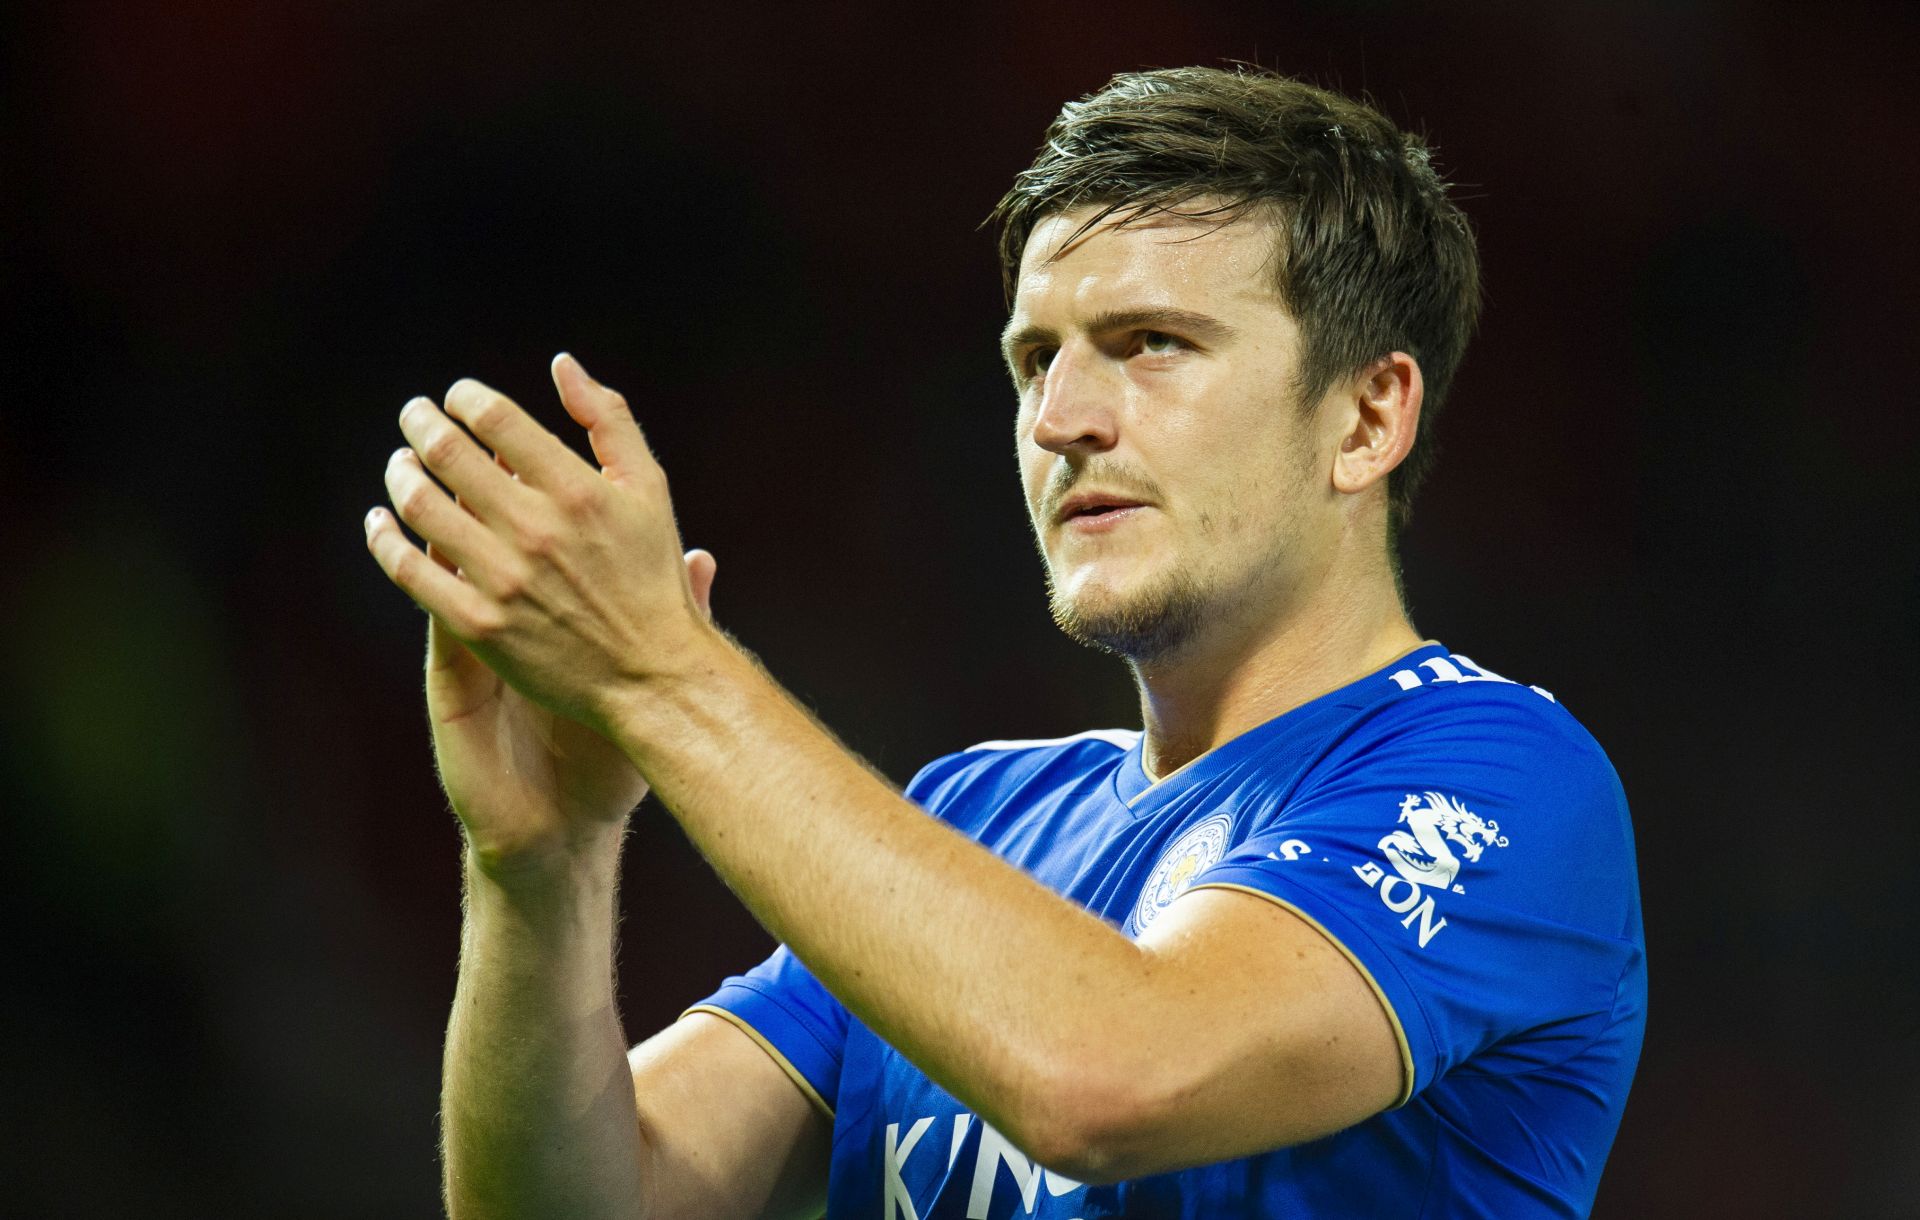 epa07757772 epa07753964 (FILE) - Leicester City's Harry Maguire reacts during the English Premier League soccer match between Manchester United and Leicester City at Old Trafford in Manchester, Britain, 10 August 2018 (re-issued 02 August 2019). Manchester United confirmed 05 August 2019 the transfer of Maguire from Leicester City. The 87 million euro deal means that the 26-year-old Maguire becomes the world's most expensive defender.  EPA/PETER POWELL *** Local Caption *** 54545601